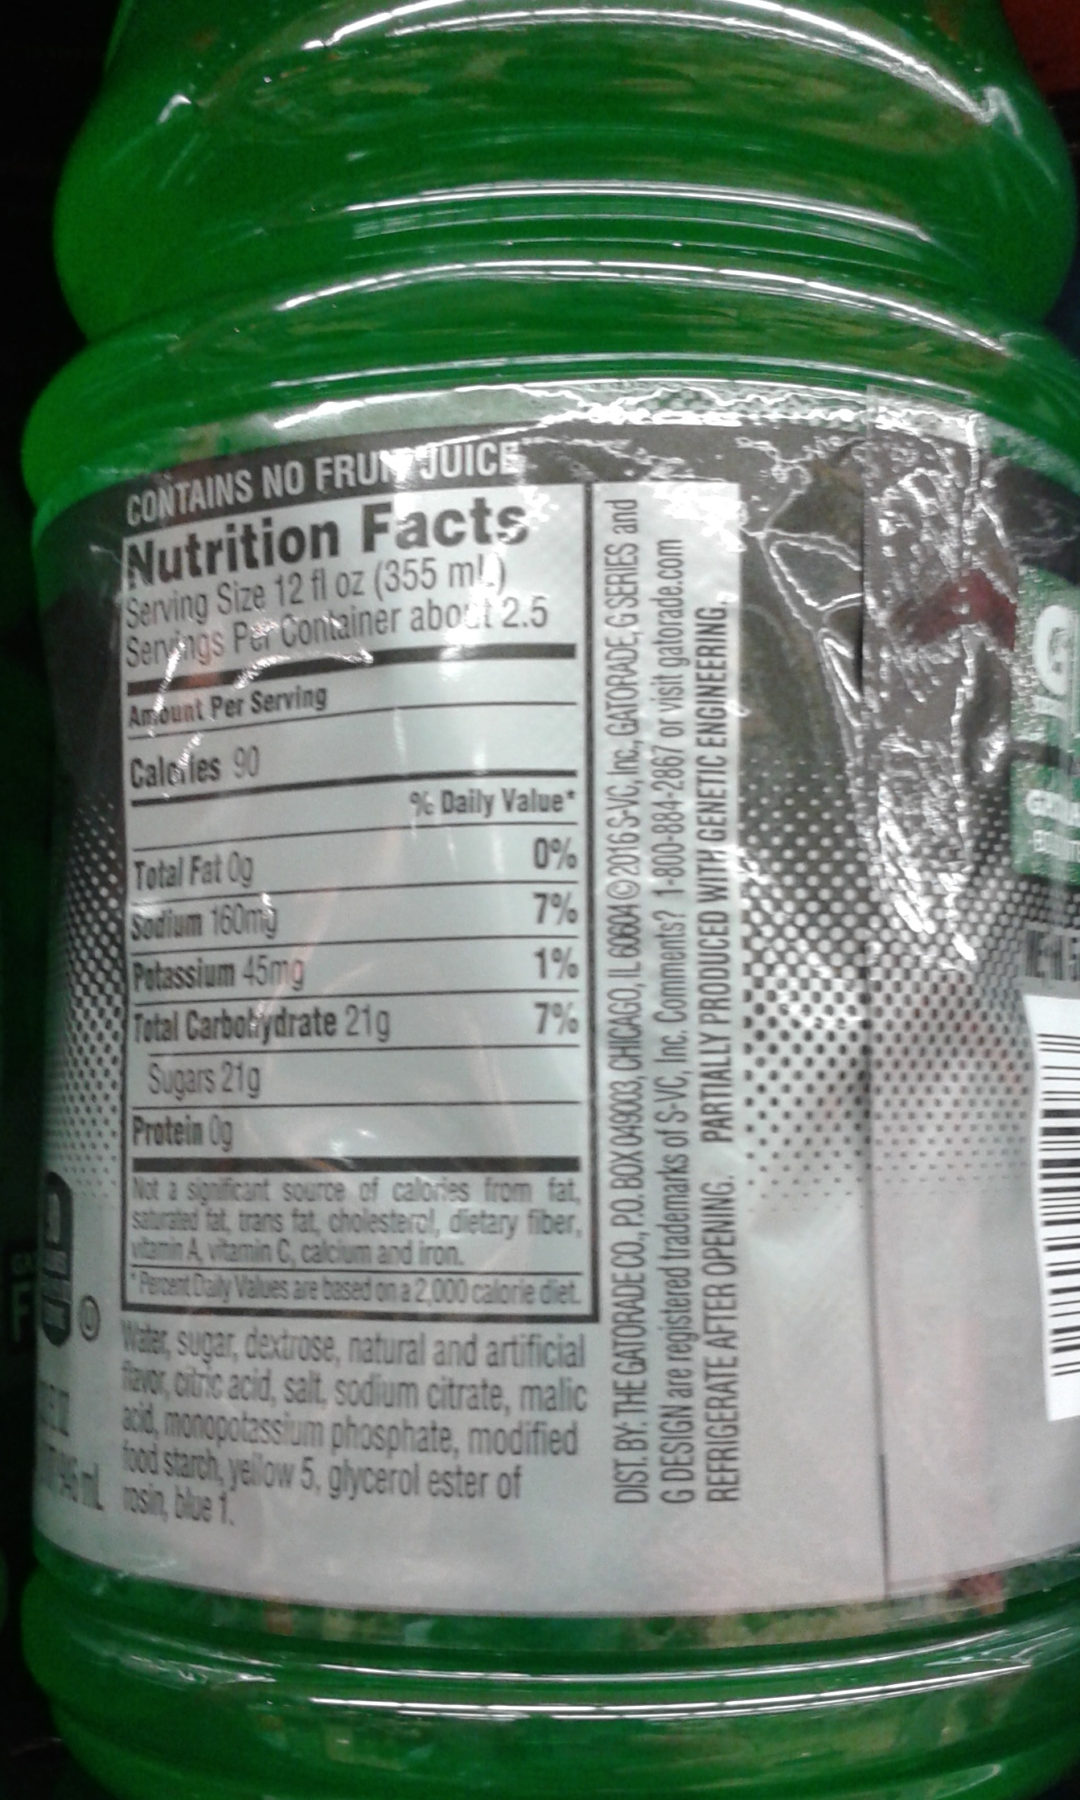 Gatorade bottle nutrition facts and ingredients list.